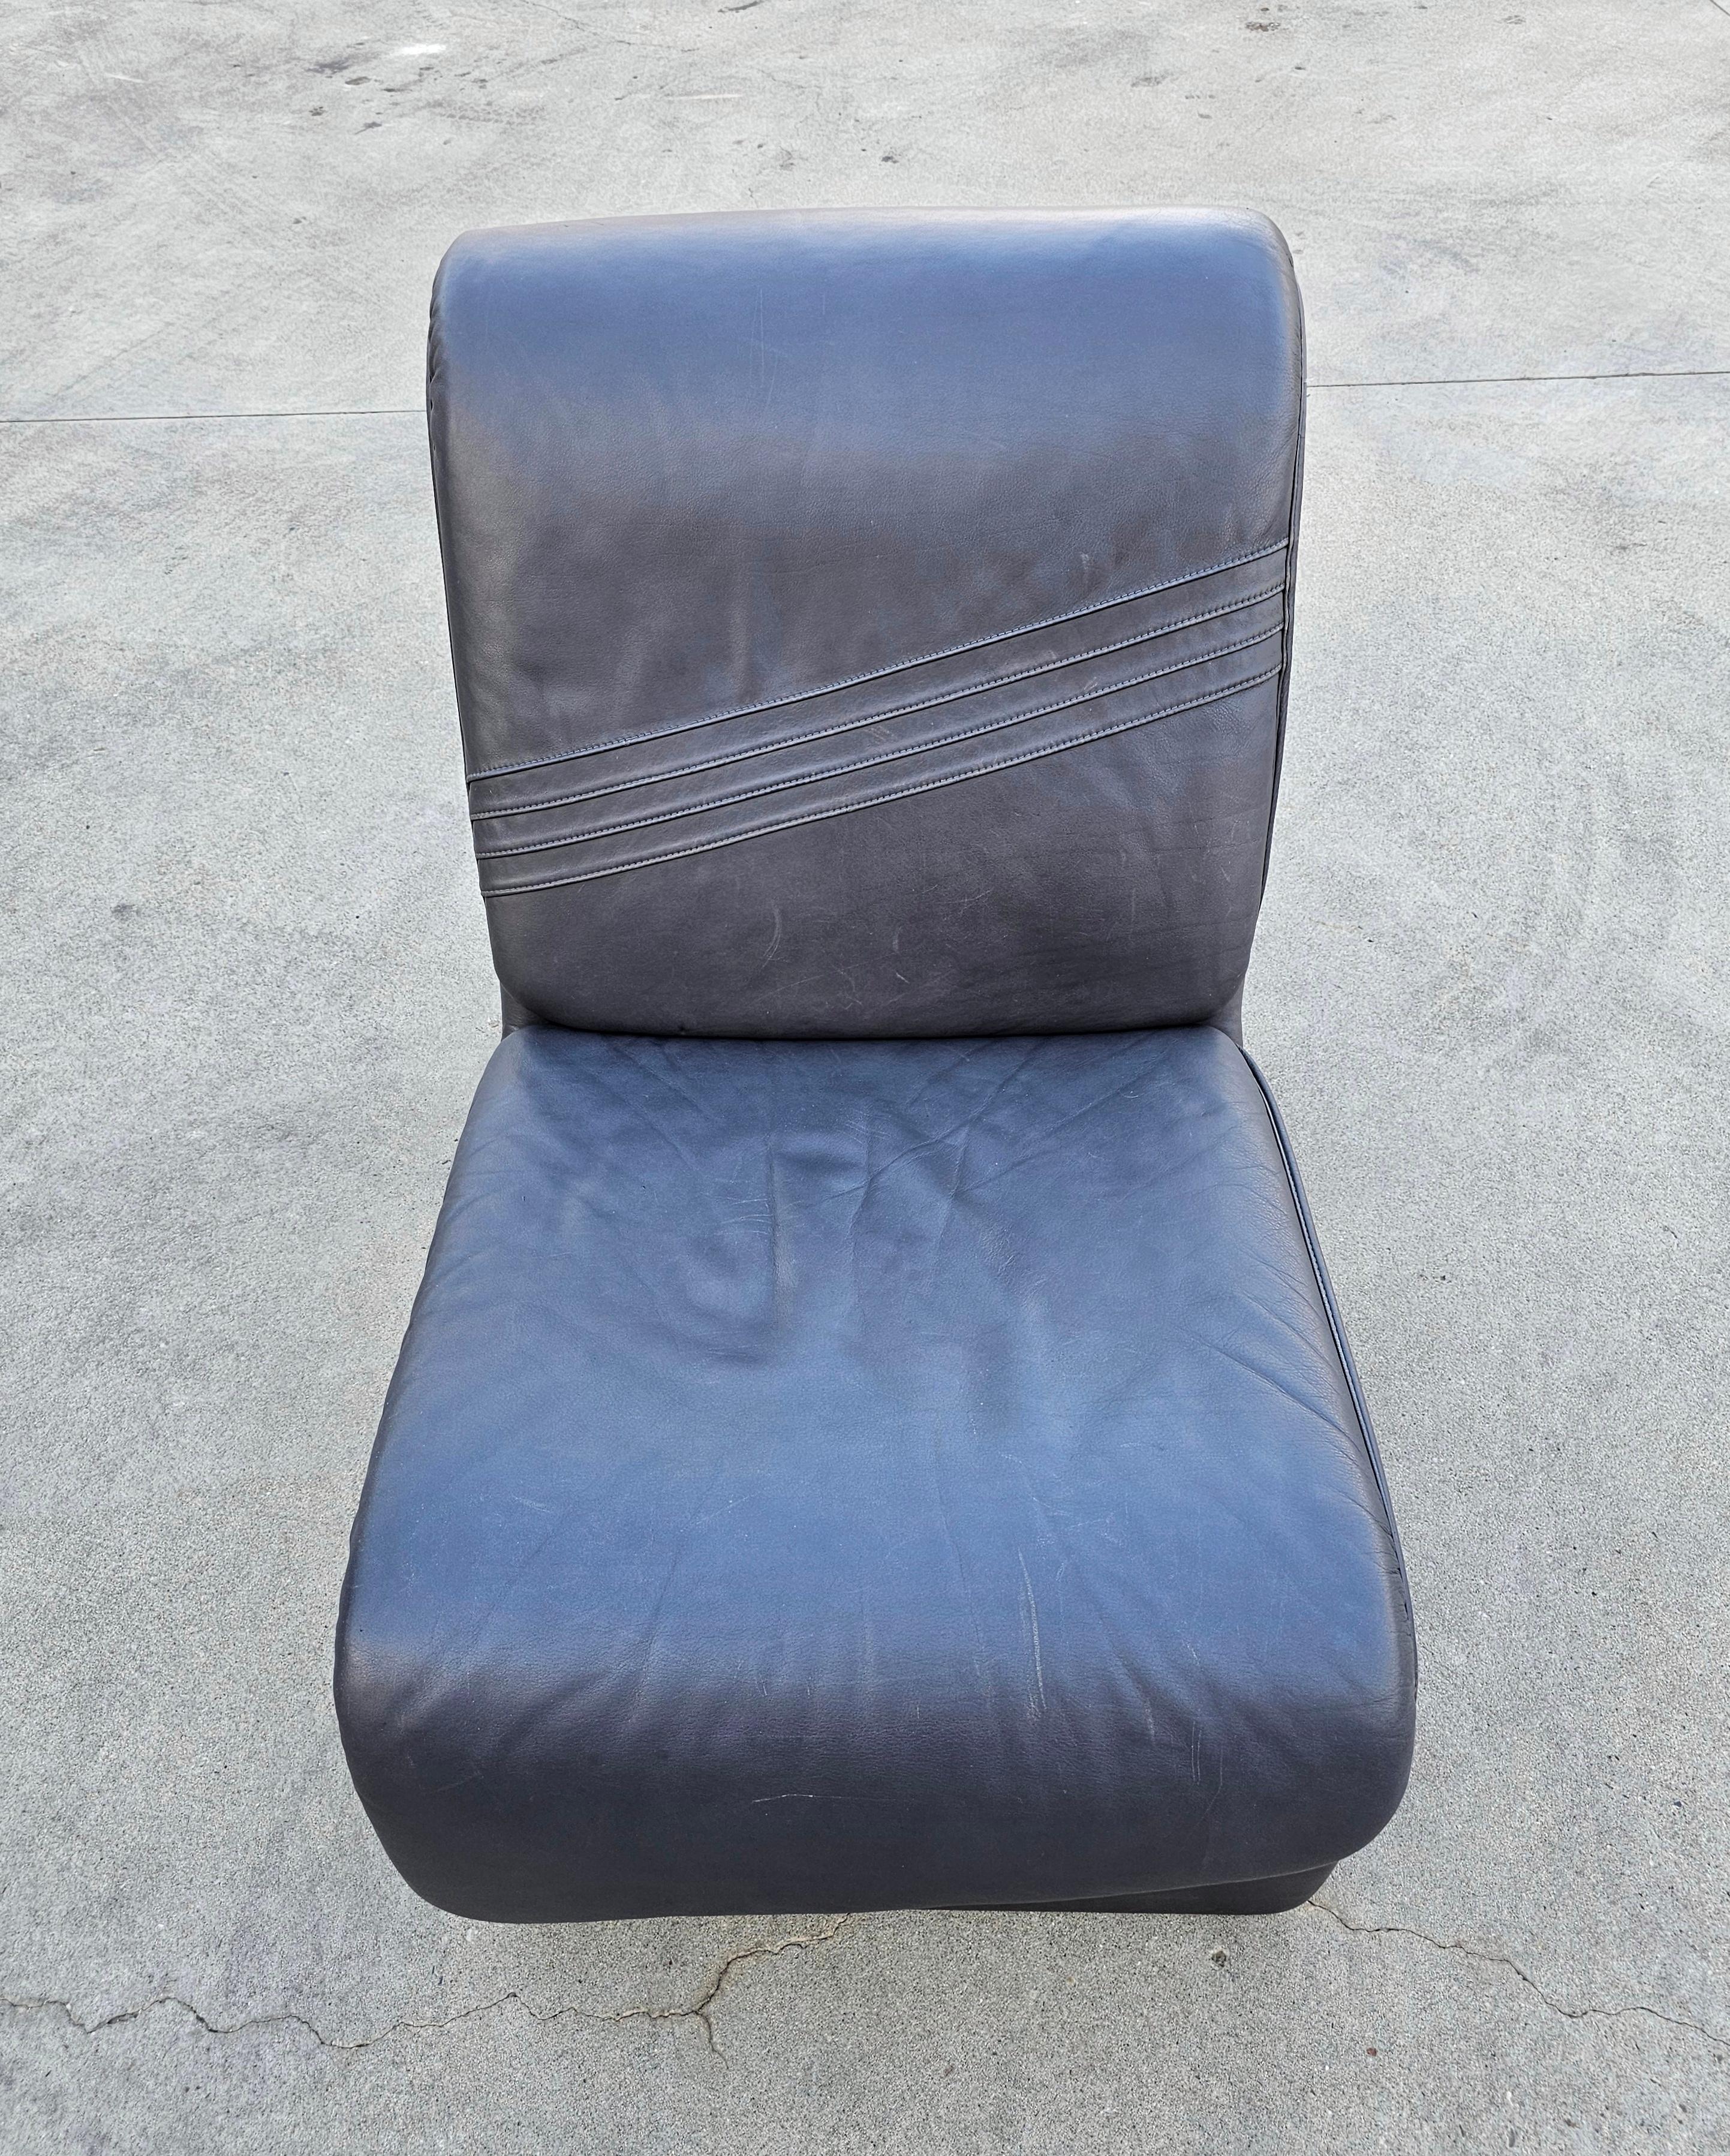 Post-Modern Postmodern Leather Lounge Chairs in style of Etienne Fermigier, Switzerland 1978 For Sale